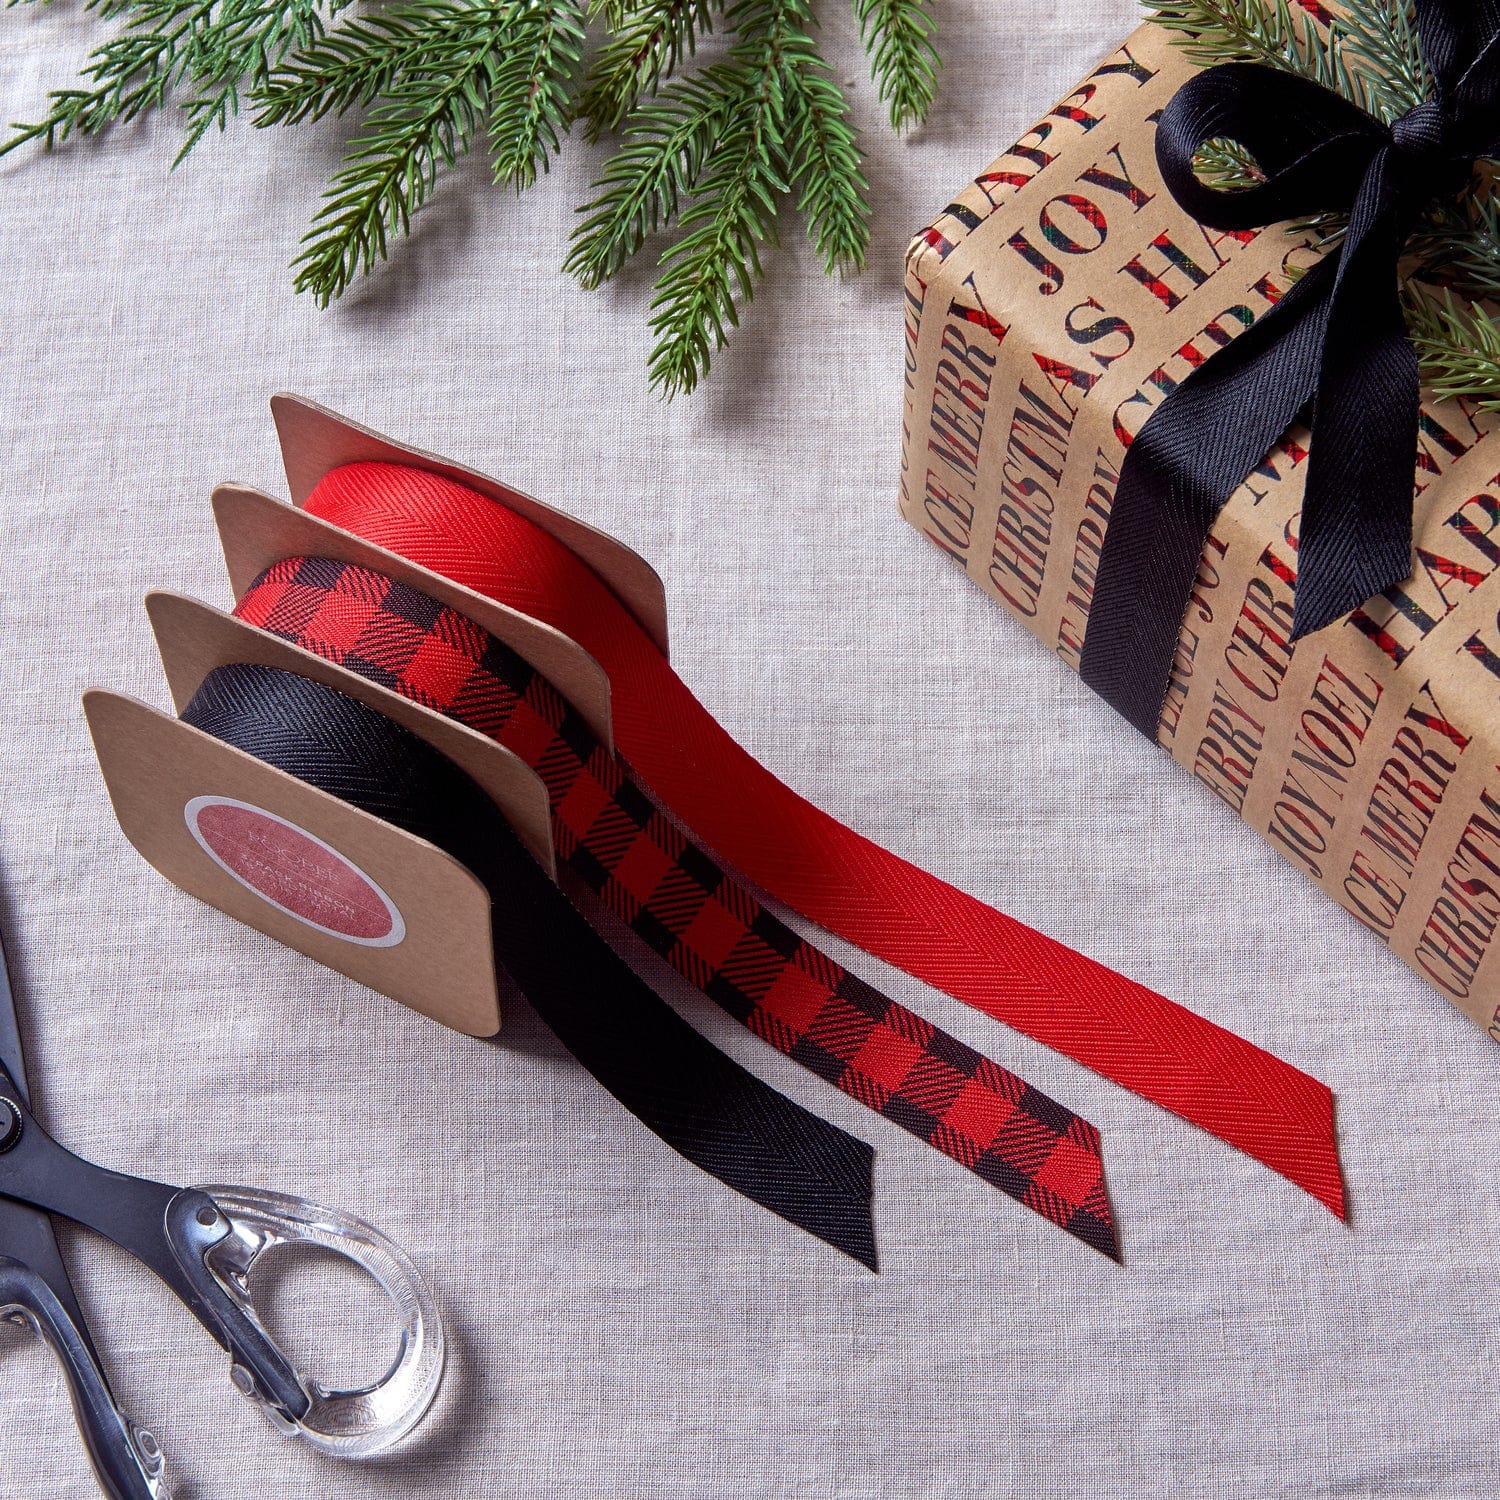 Merry Christmas Wrapping Ribbon Pack